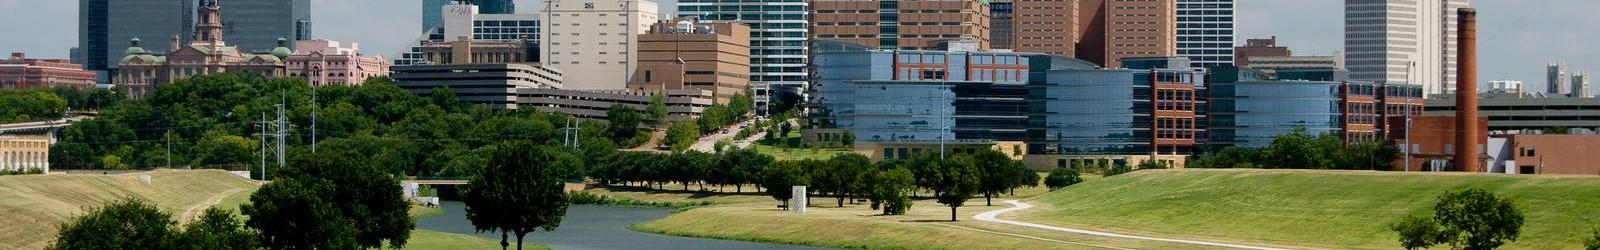 Therapists in Fort Worth, Texas: psychologists, counselors, and mental health specialists